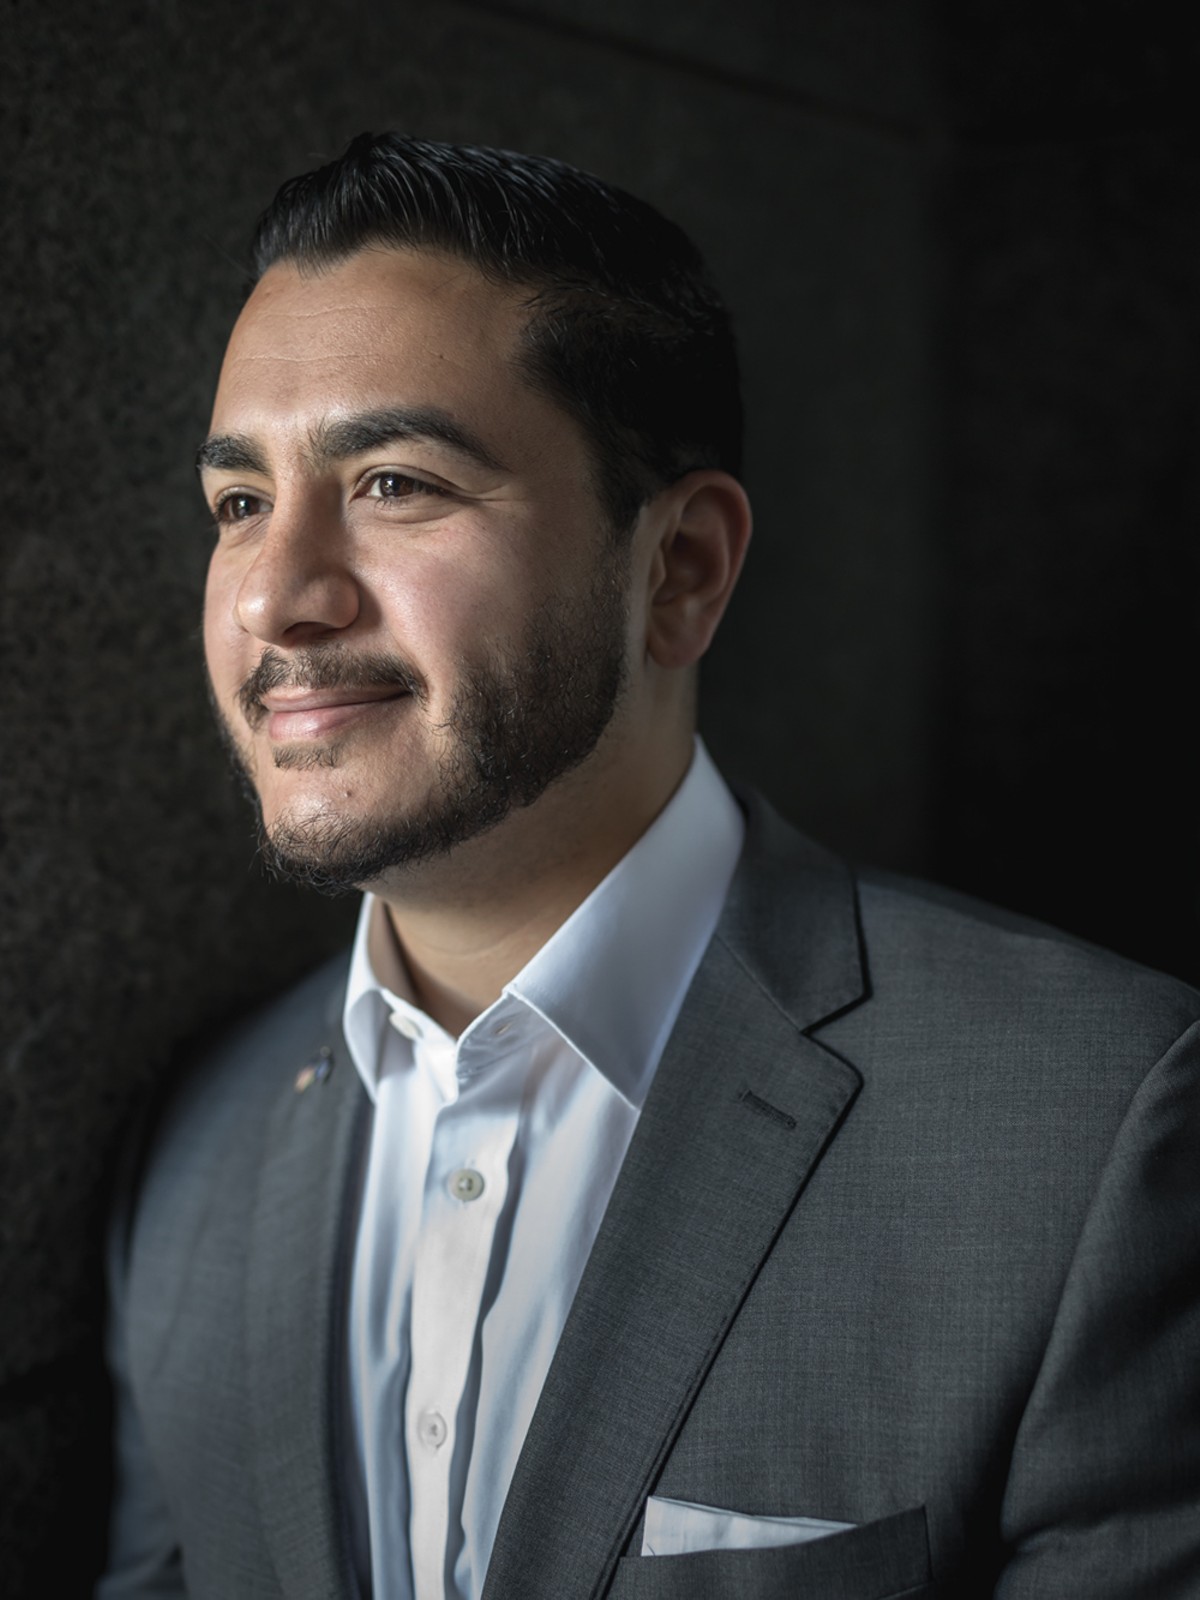 The People Issue: Abdul El-Sayed, 2018 gubernatorial candidate